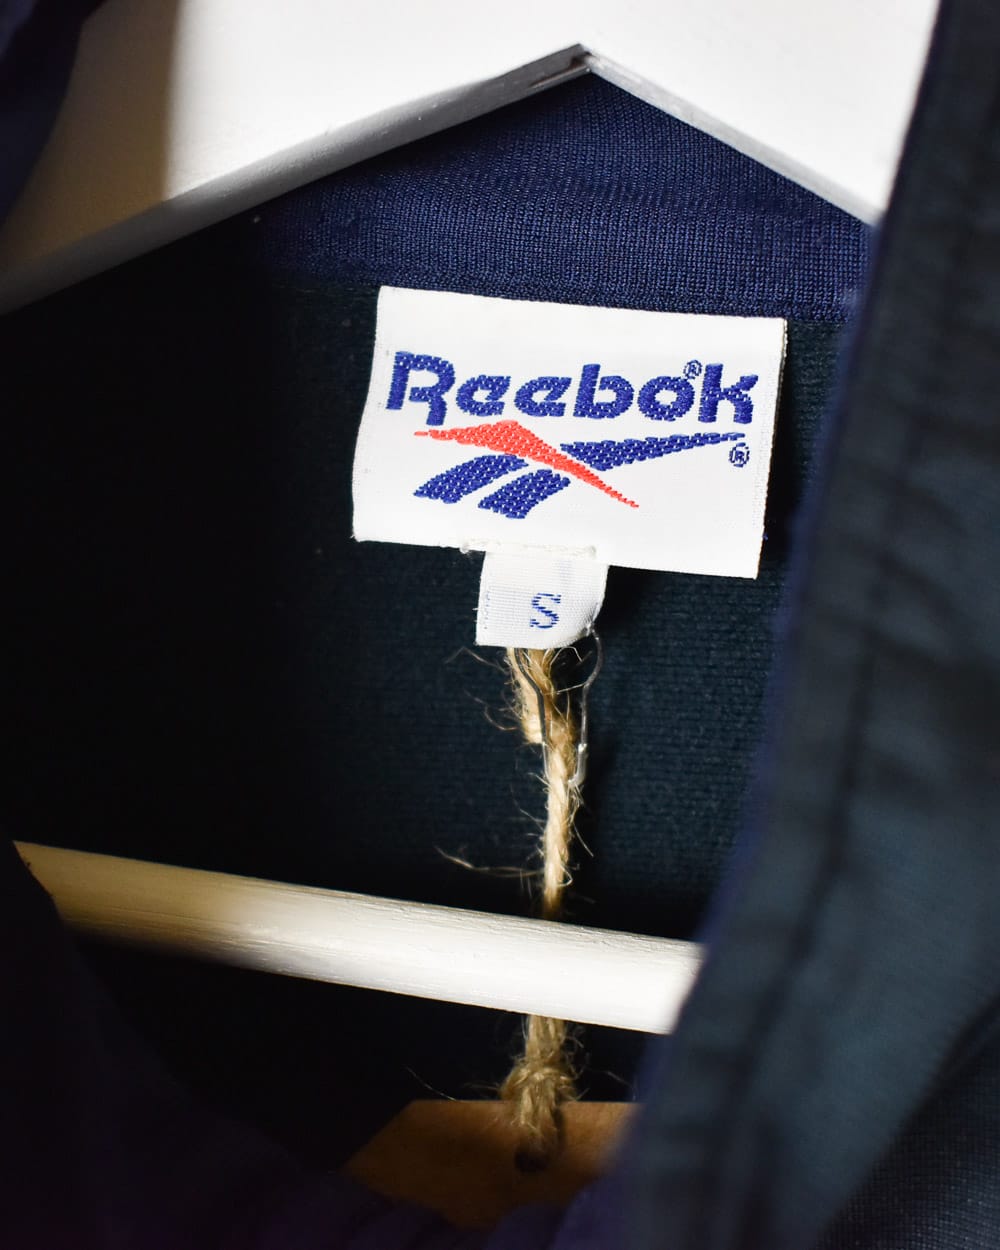 Navy Reebok Tracksuit Top - Small